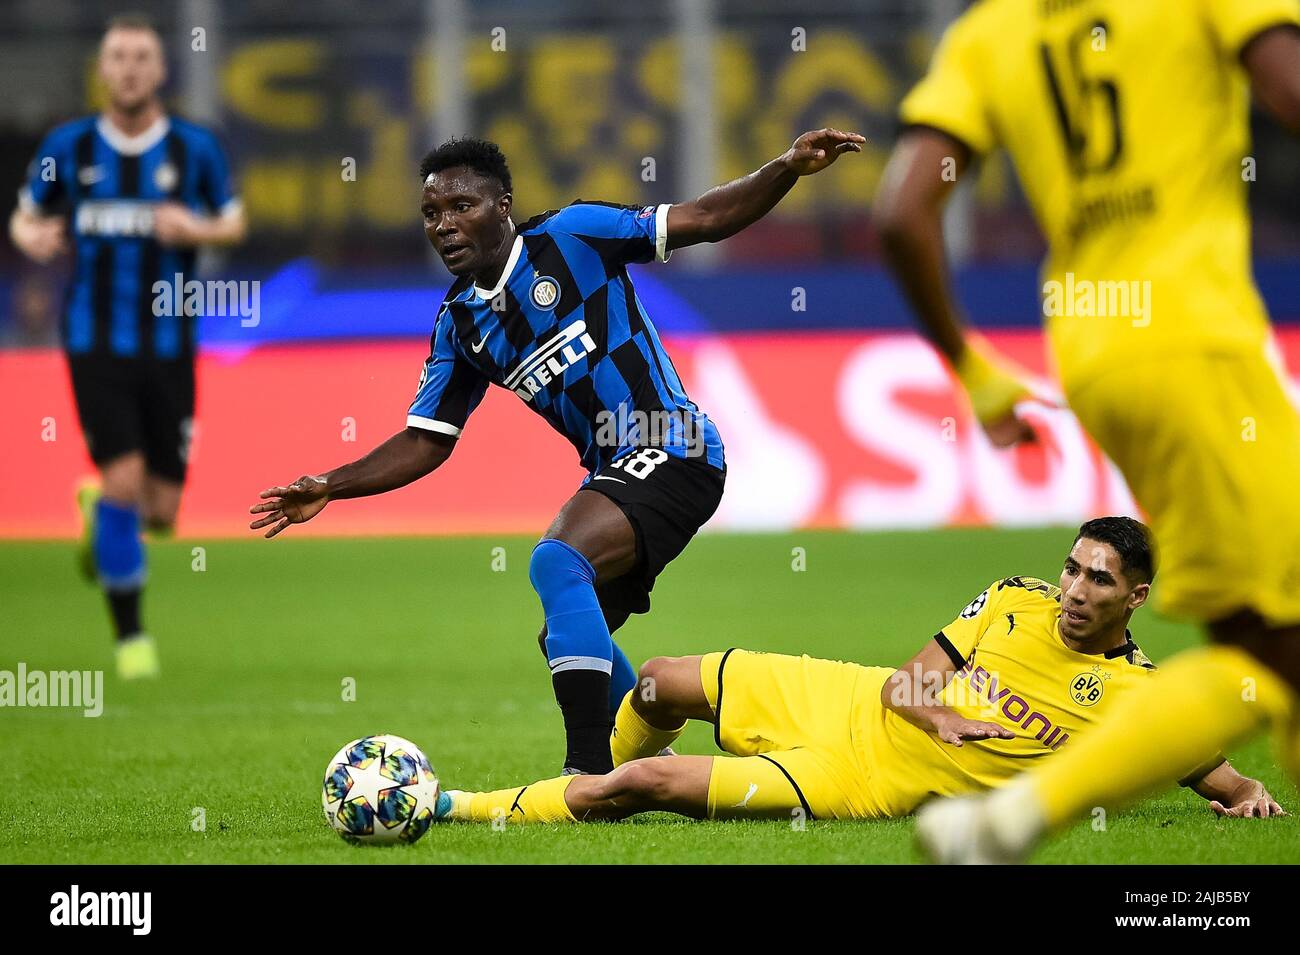 Milan, Italy - 23 October, 2019: Kwadwo Asamoah (C) of FC Internazionale is tackled by Achraf Hakimi of Borussia Dortmund during the UEFA Champions League football match between FC Internazionale and Borussia Dortmund. FC Internazionale won 2-0 over Borussia Dortmund. Credit: Nicolò Campo/Alamy Live News Stock Photo